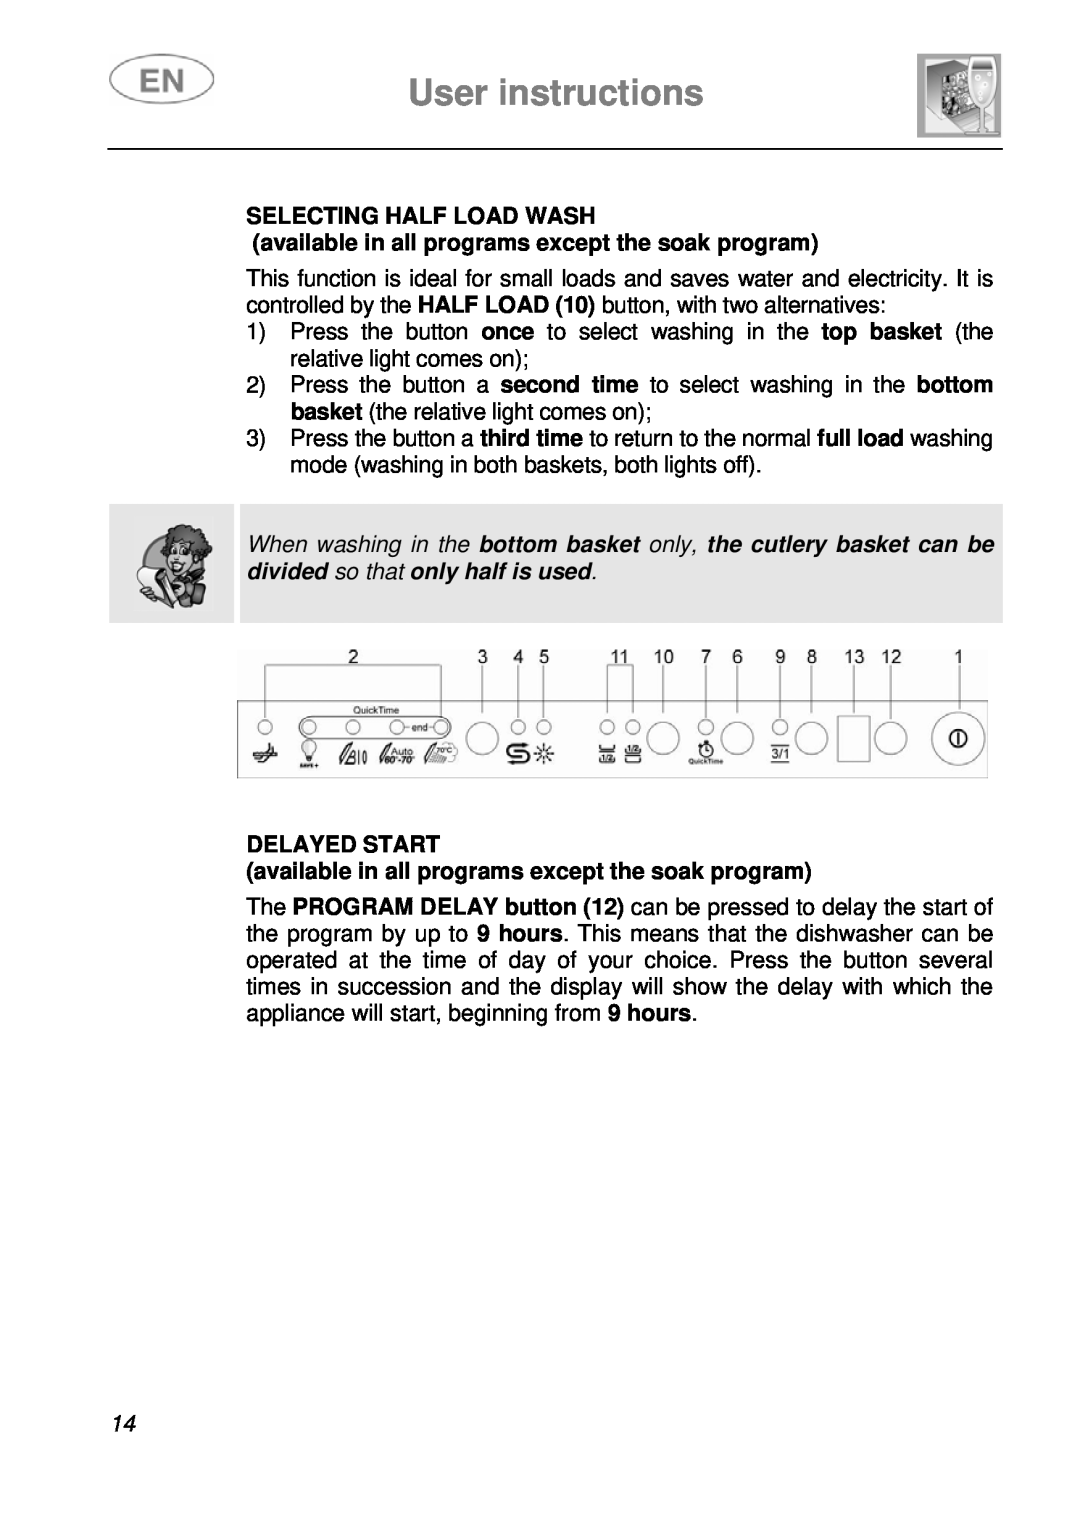 Smeg STA643PQ manual User instructions, Selecting Half Load Wash, available in all programs except the soak program 